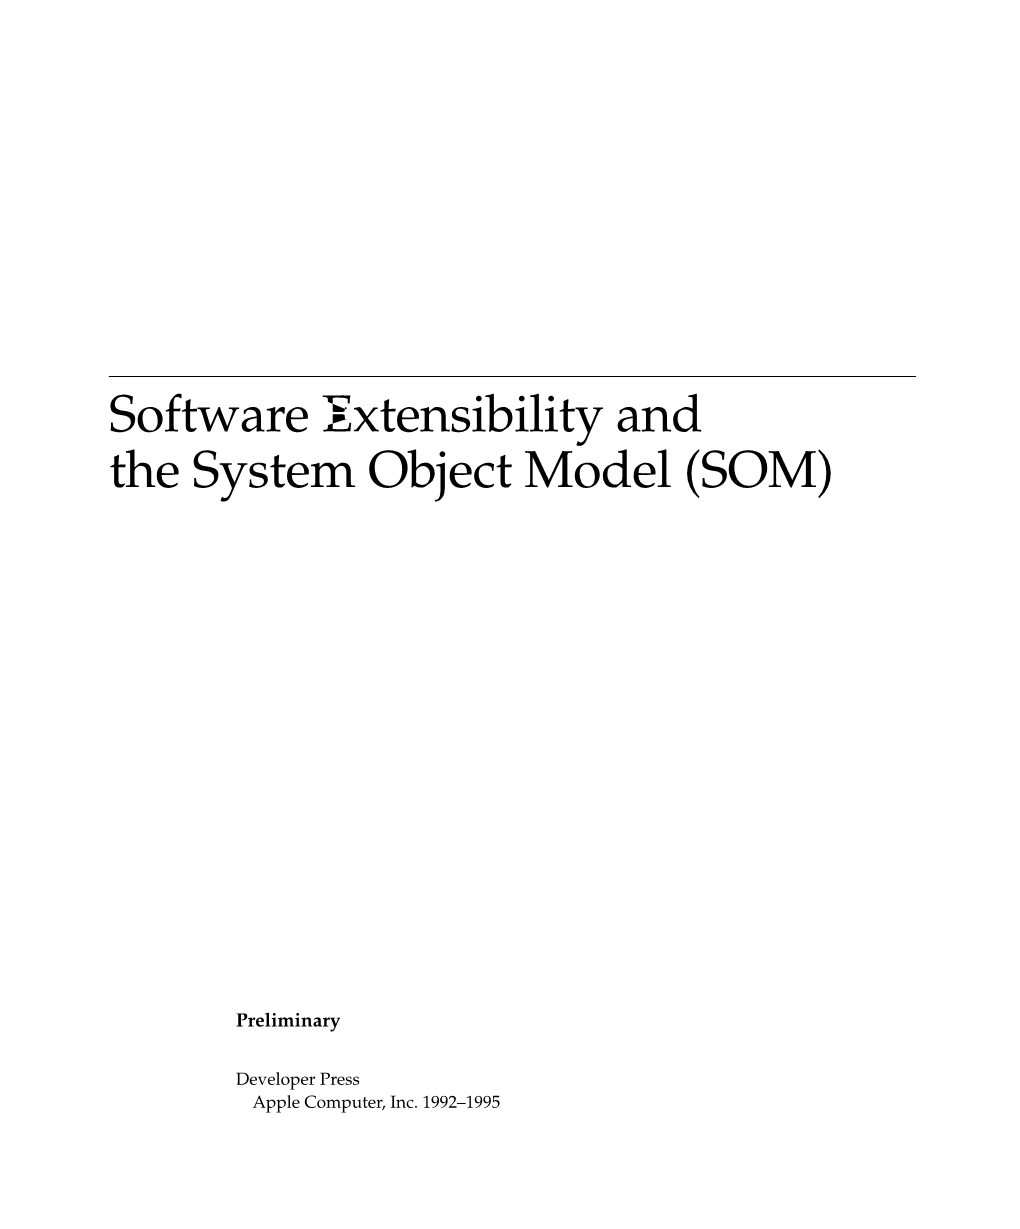 Software Extensibility and the System Object Model (SOM)